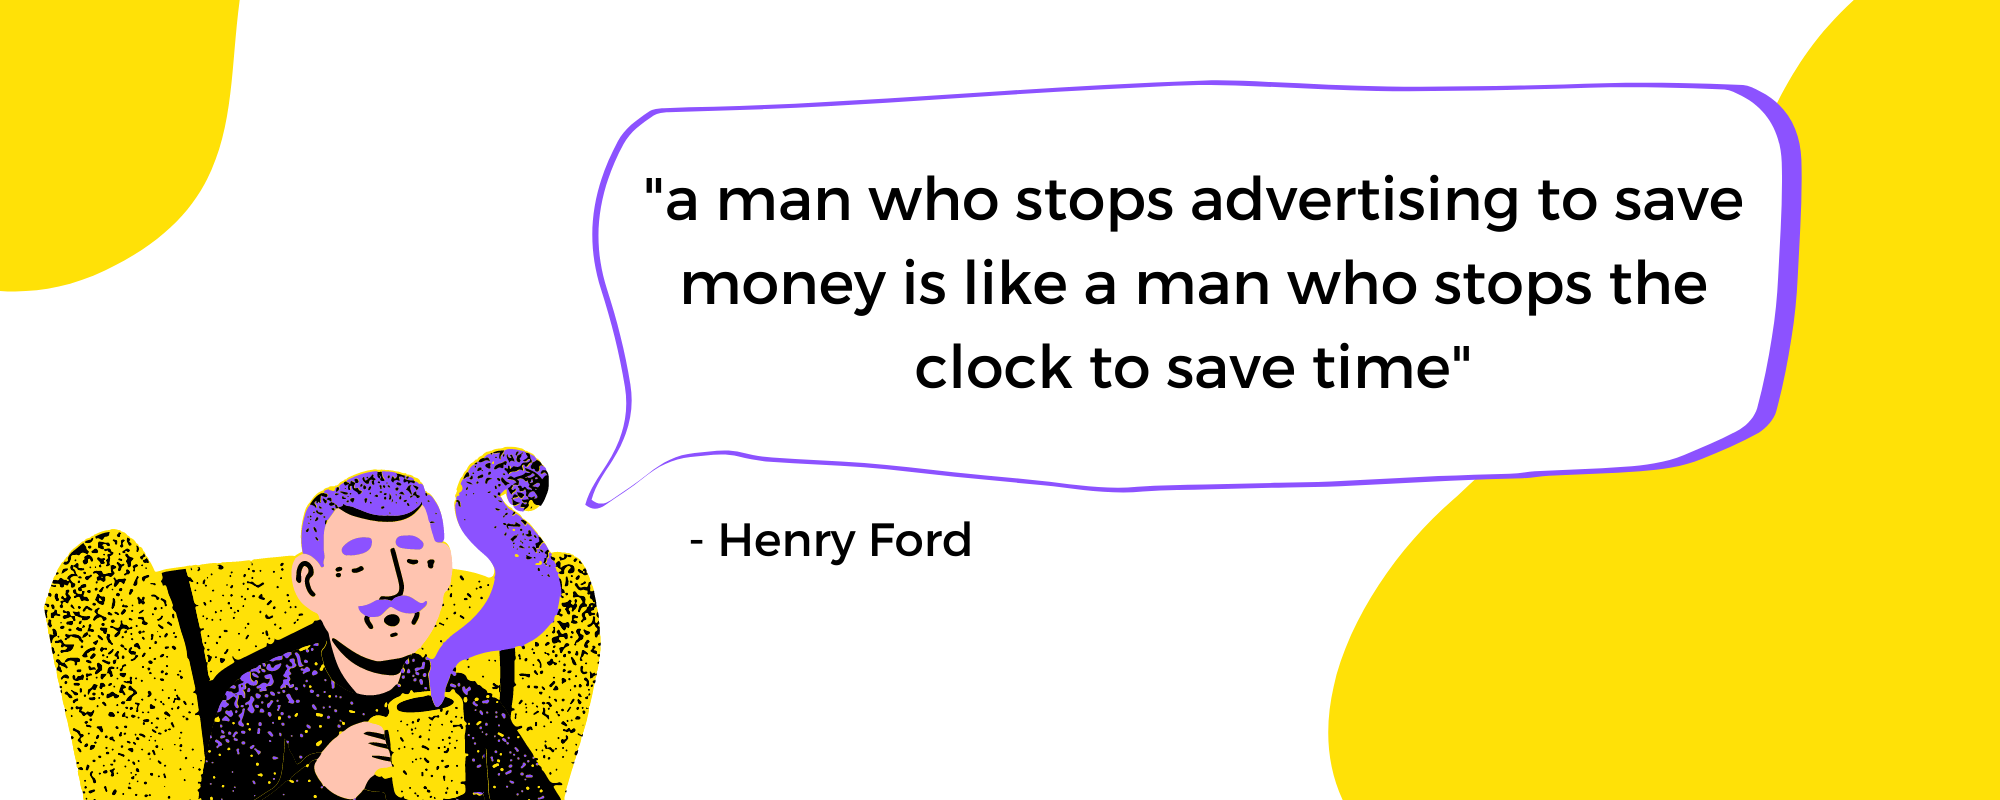 Henry Ford's quote: "a man who stops advertising to save money is like a man who stops the clock to save time"